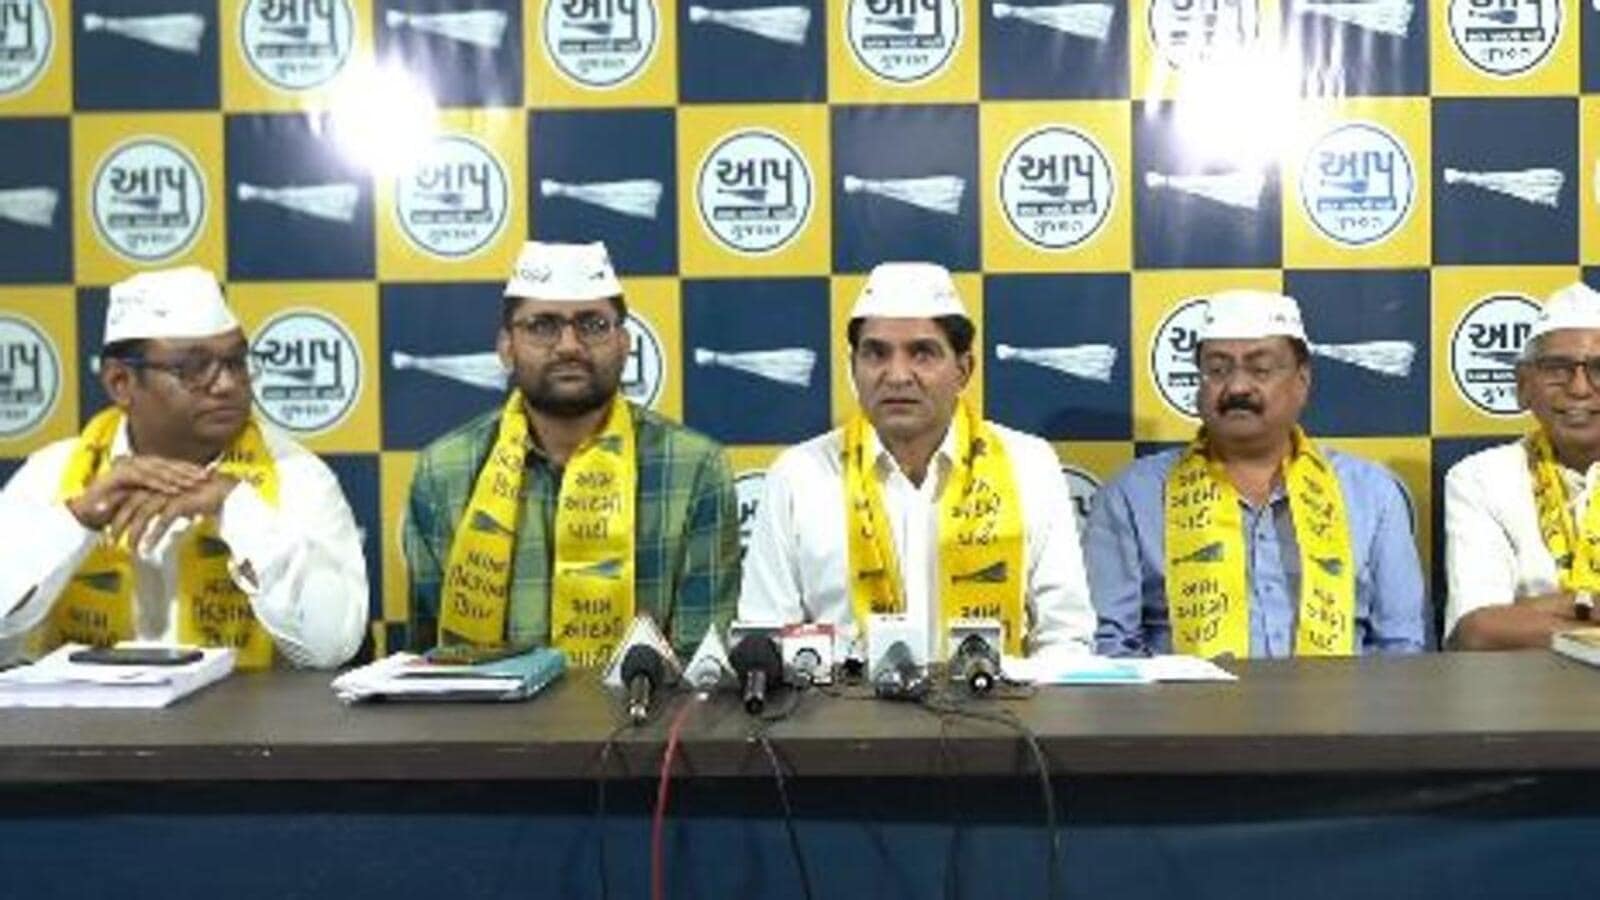 AAP names 6,098 new office bearers in Gujarat overhaul ahead of December  elections | Latest News India - Hindustan Times